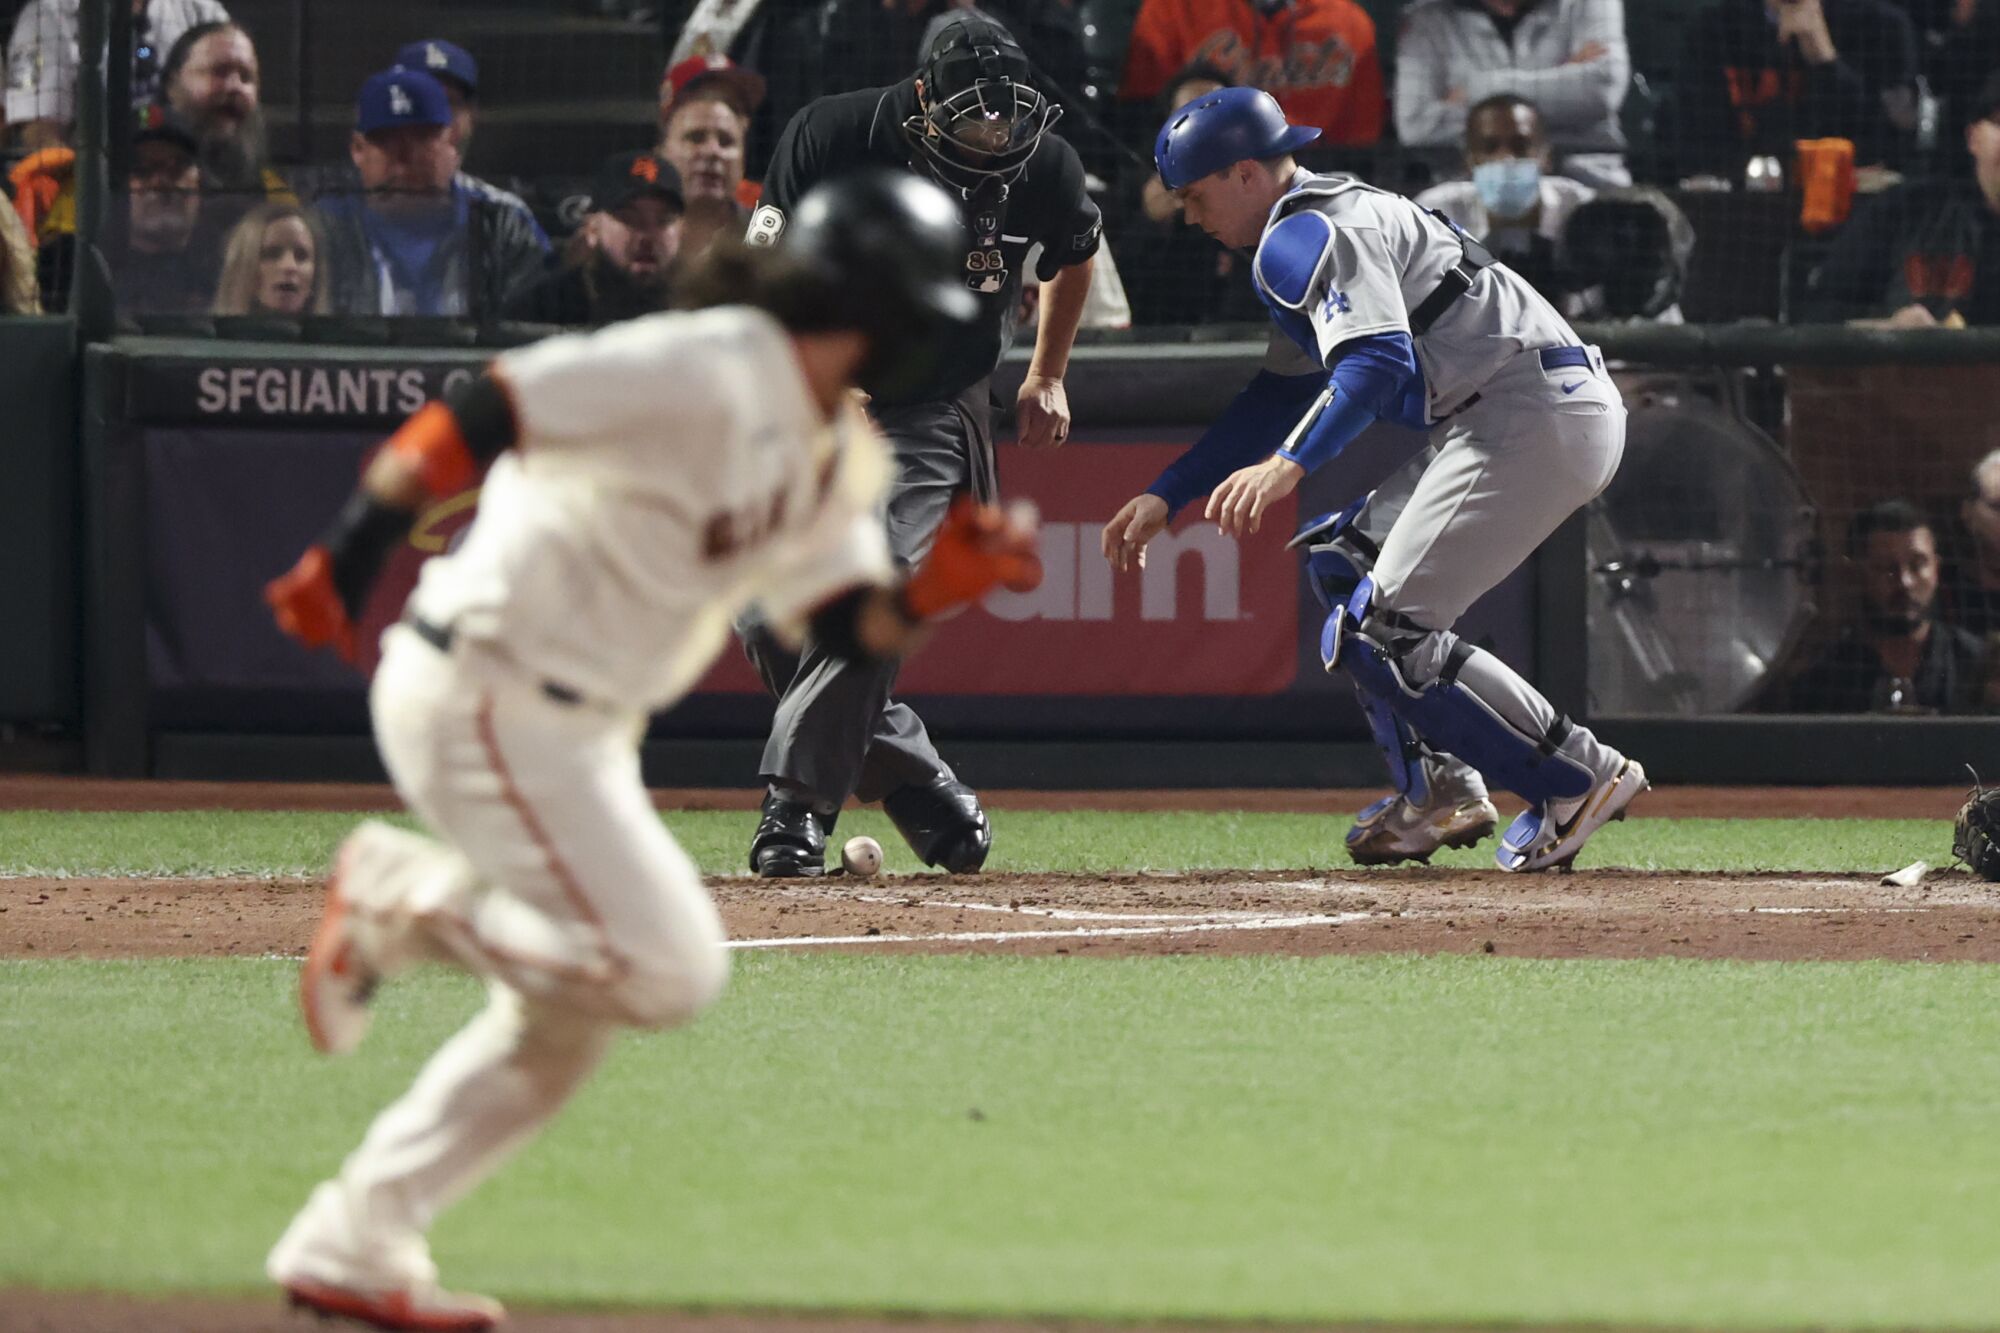 Dodgers catcher Will Smith plays a wild pitch by Julio Urias as Giants' Brandon Crawford heads to second base